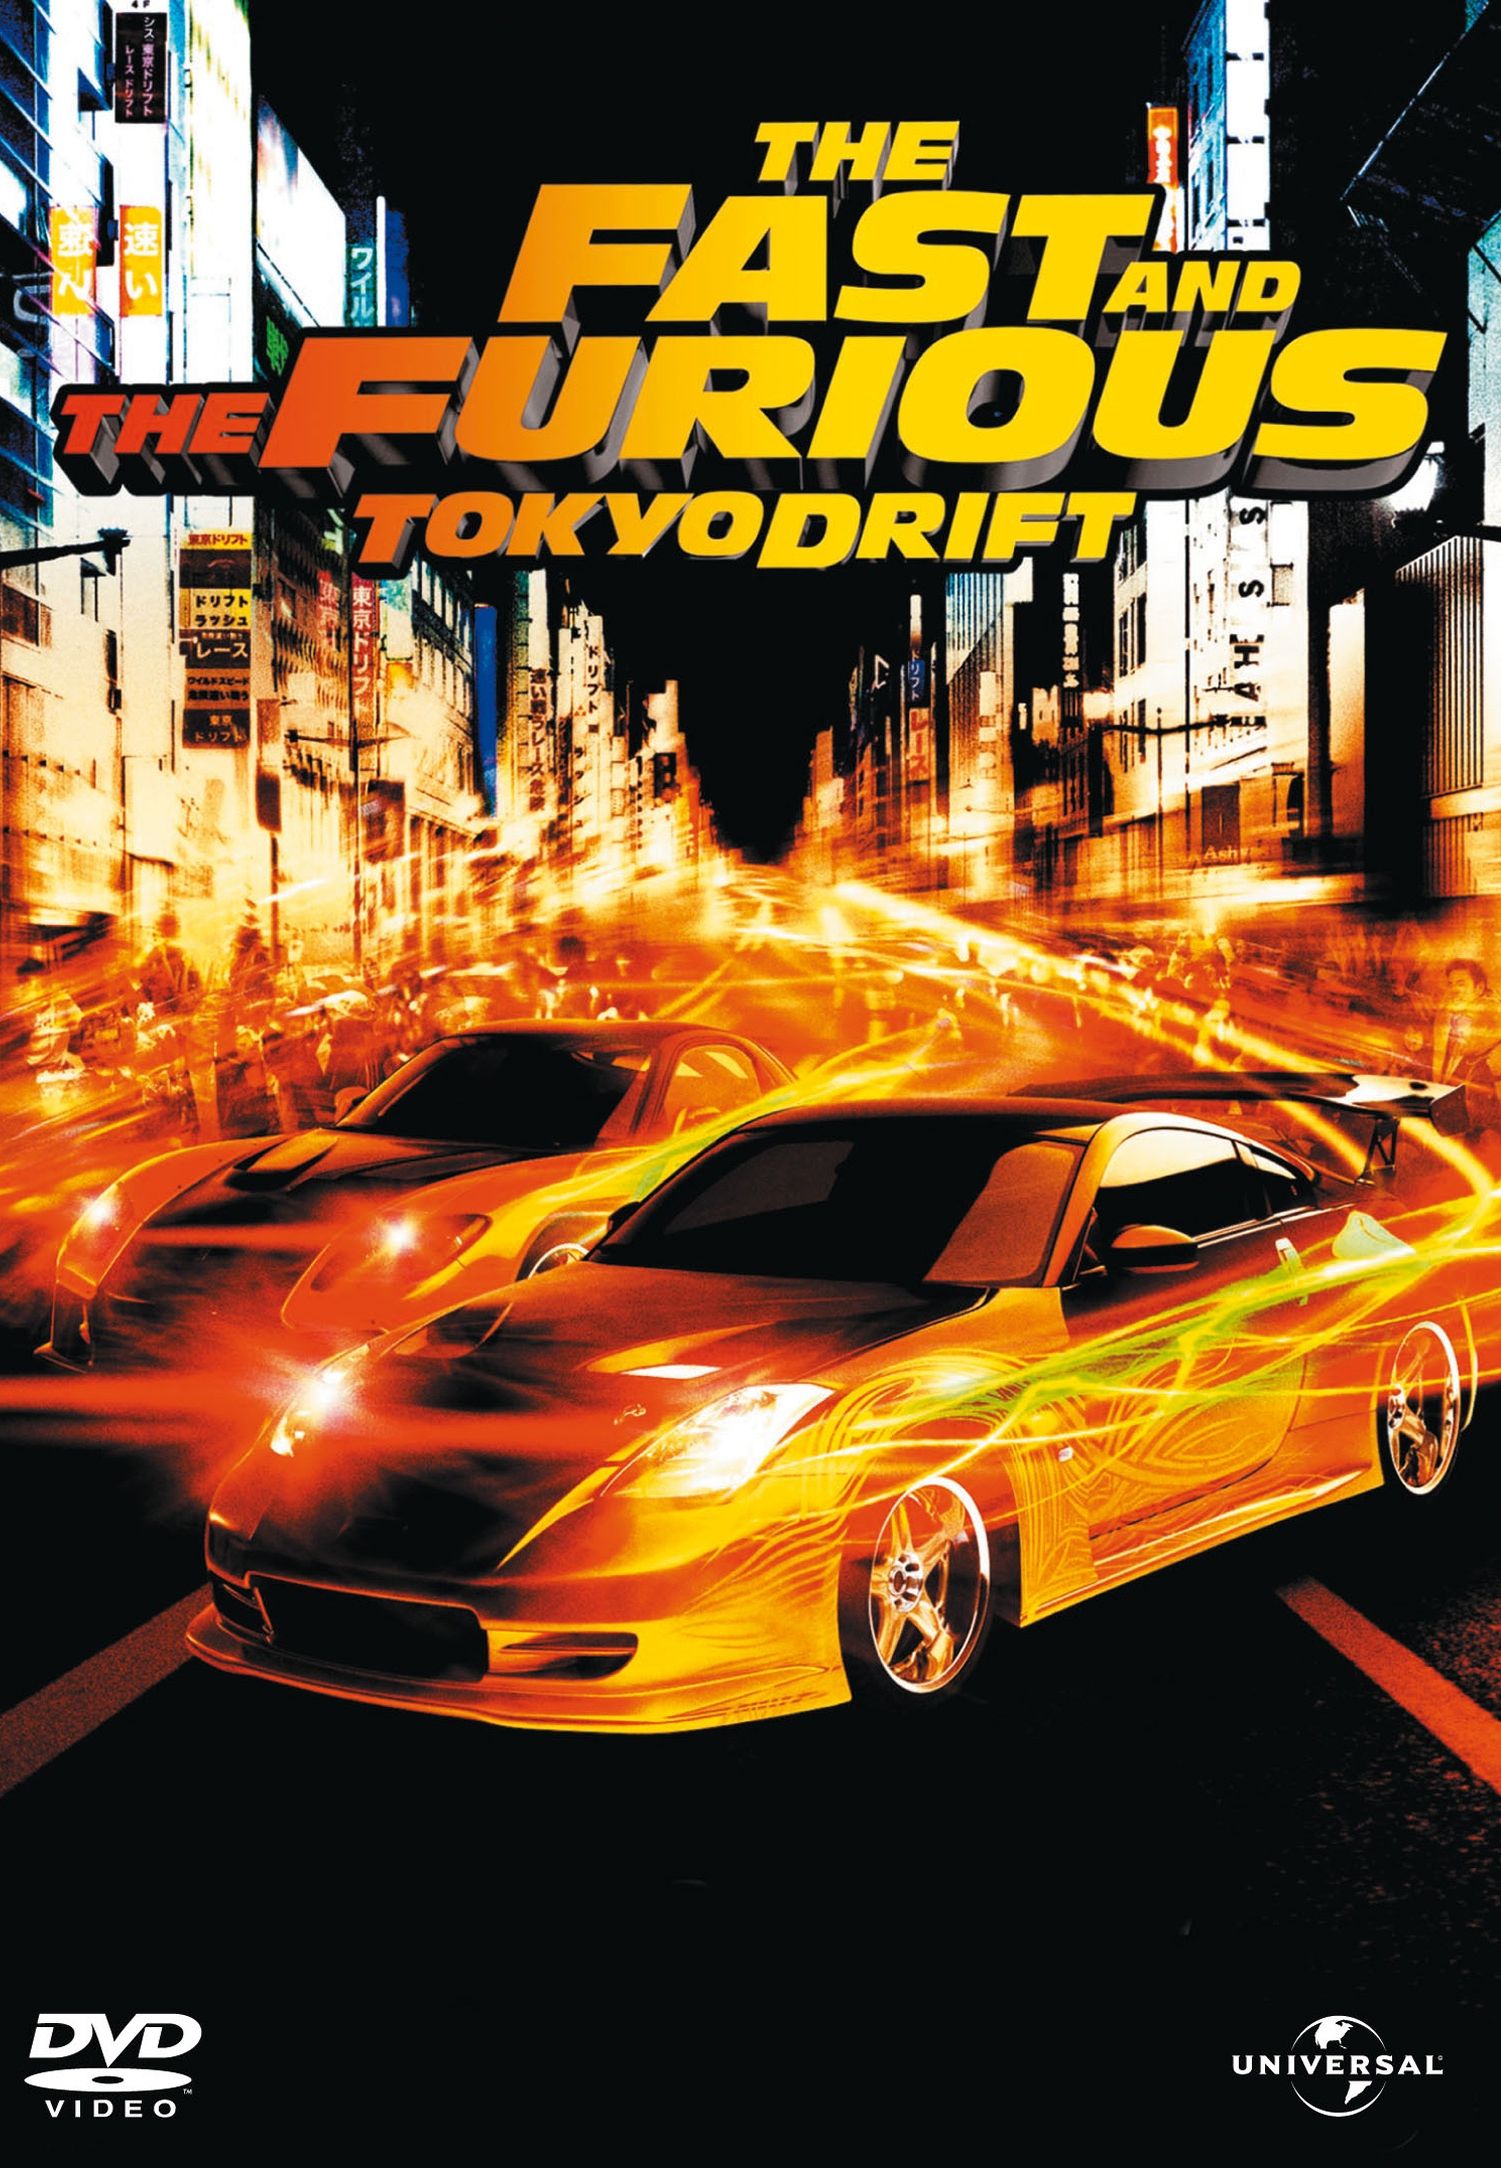 The Fast and the Furious: Tokyo Drift | Total Movies Wiki | FANDOM powered by Wikia